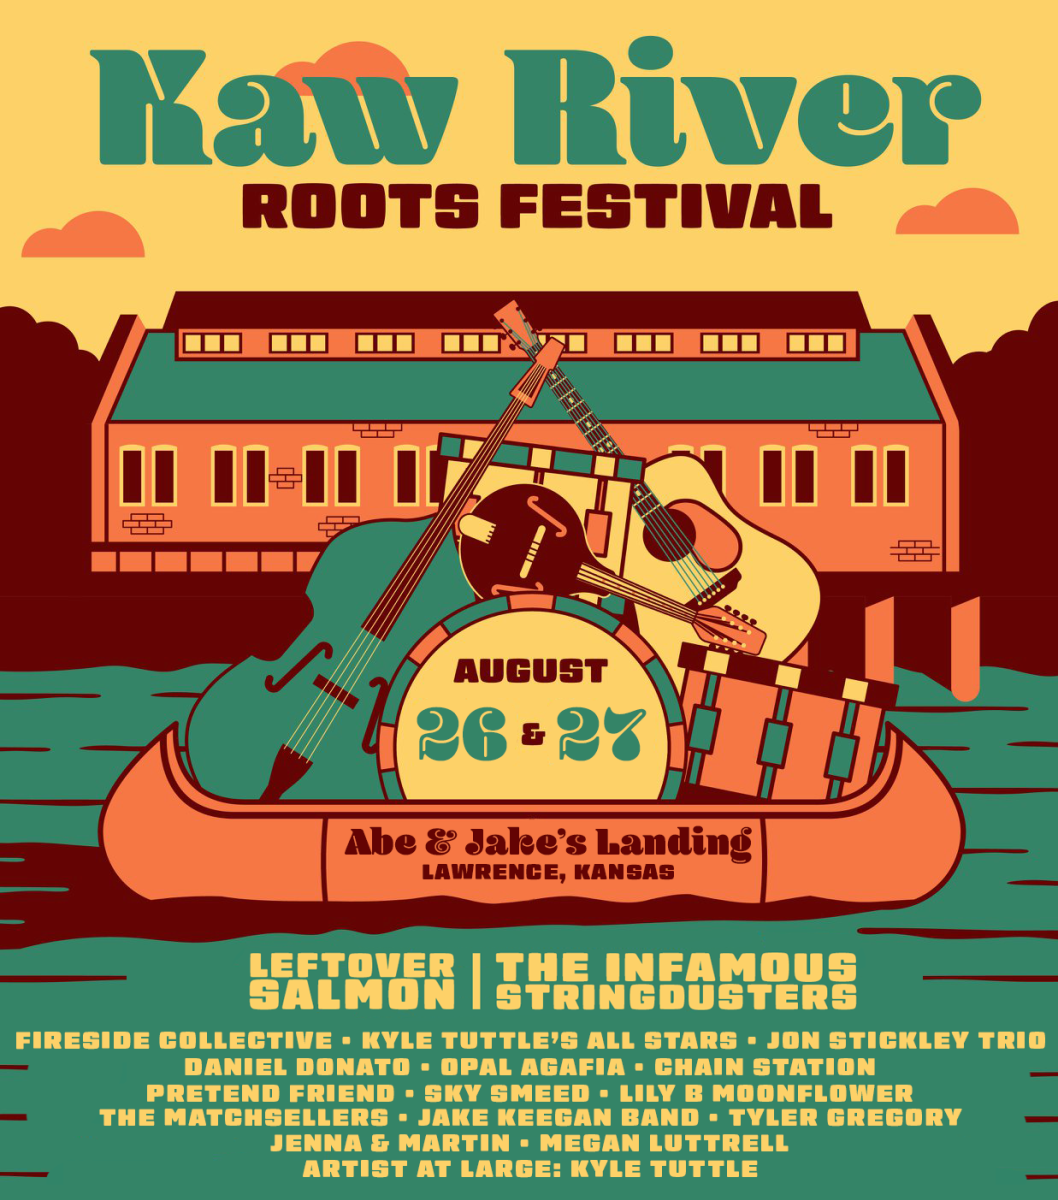 Kaw River Roots Festival